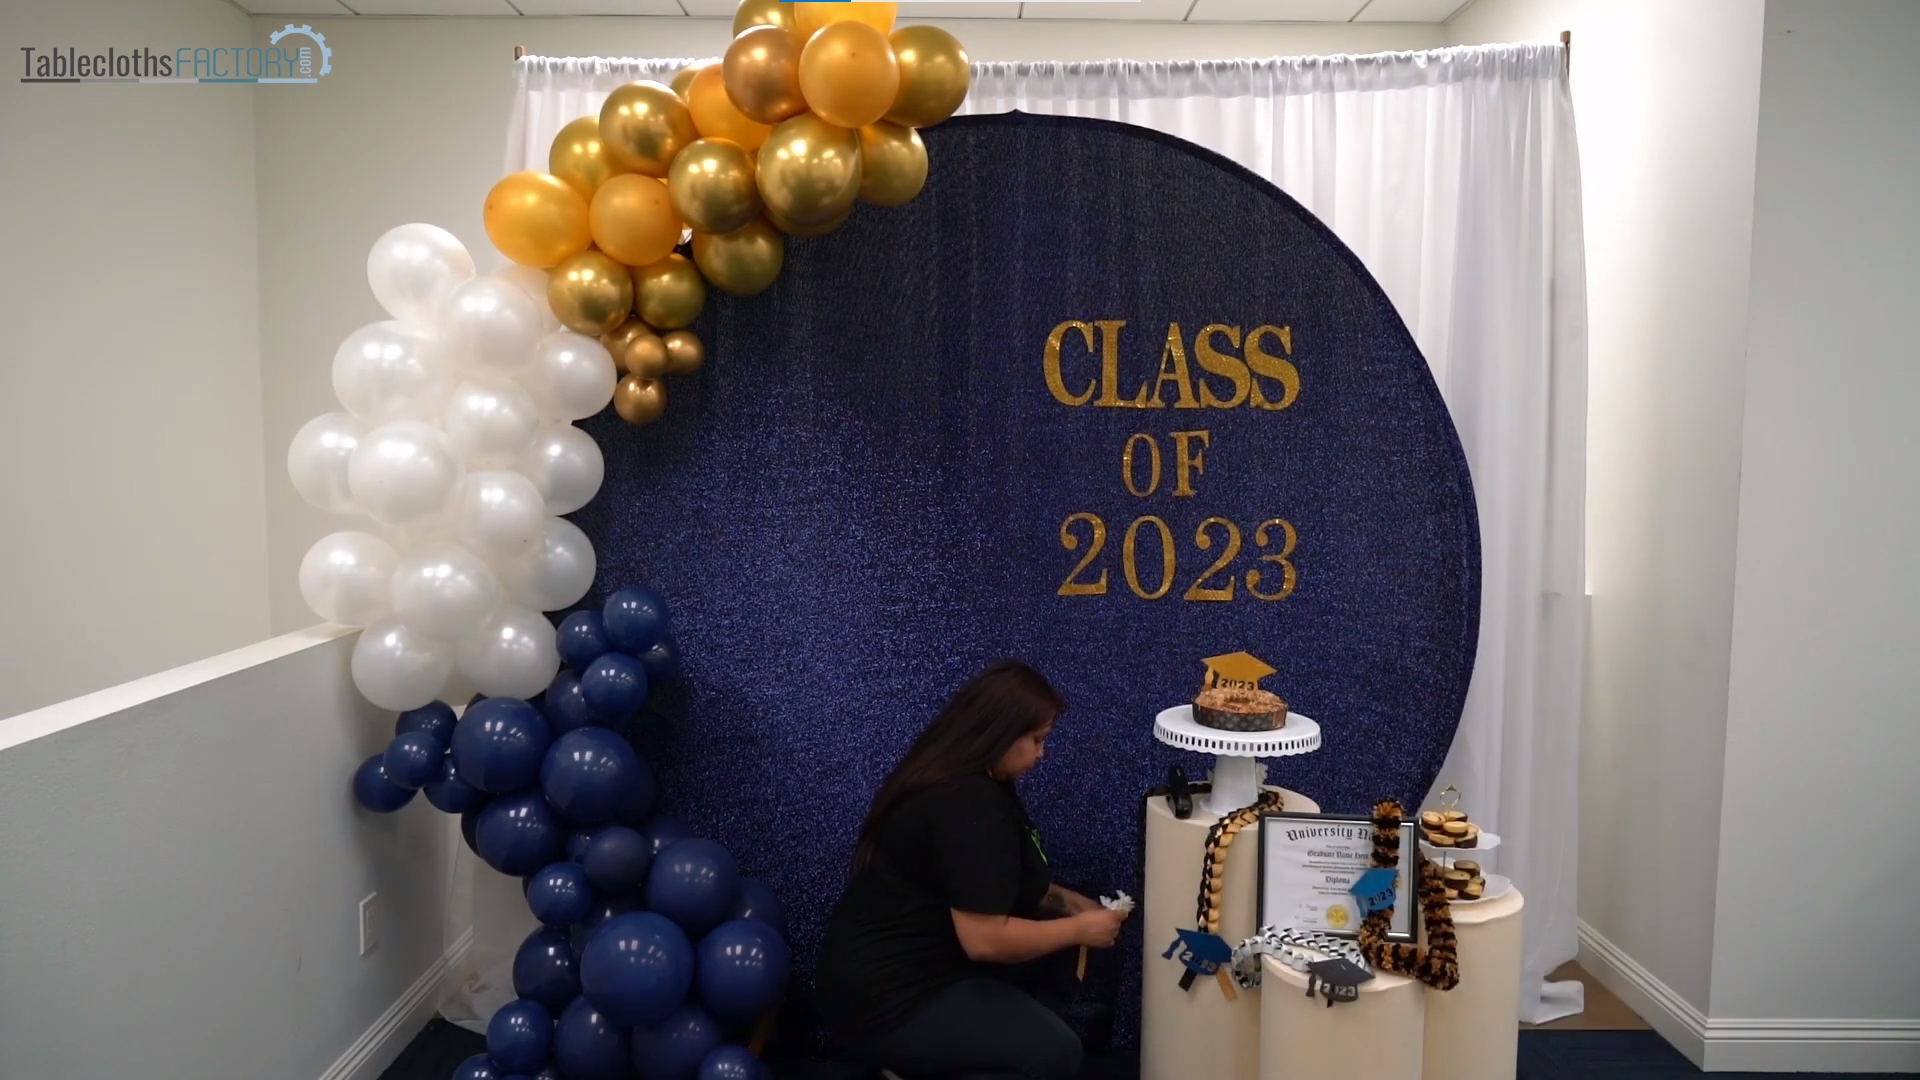 Woman decorating the acrylic stands with treats and graduation decor